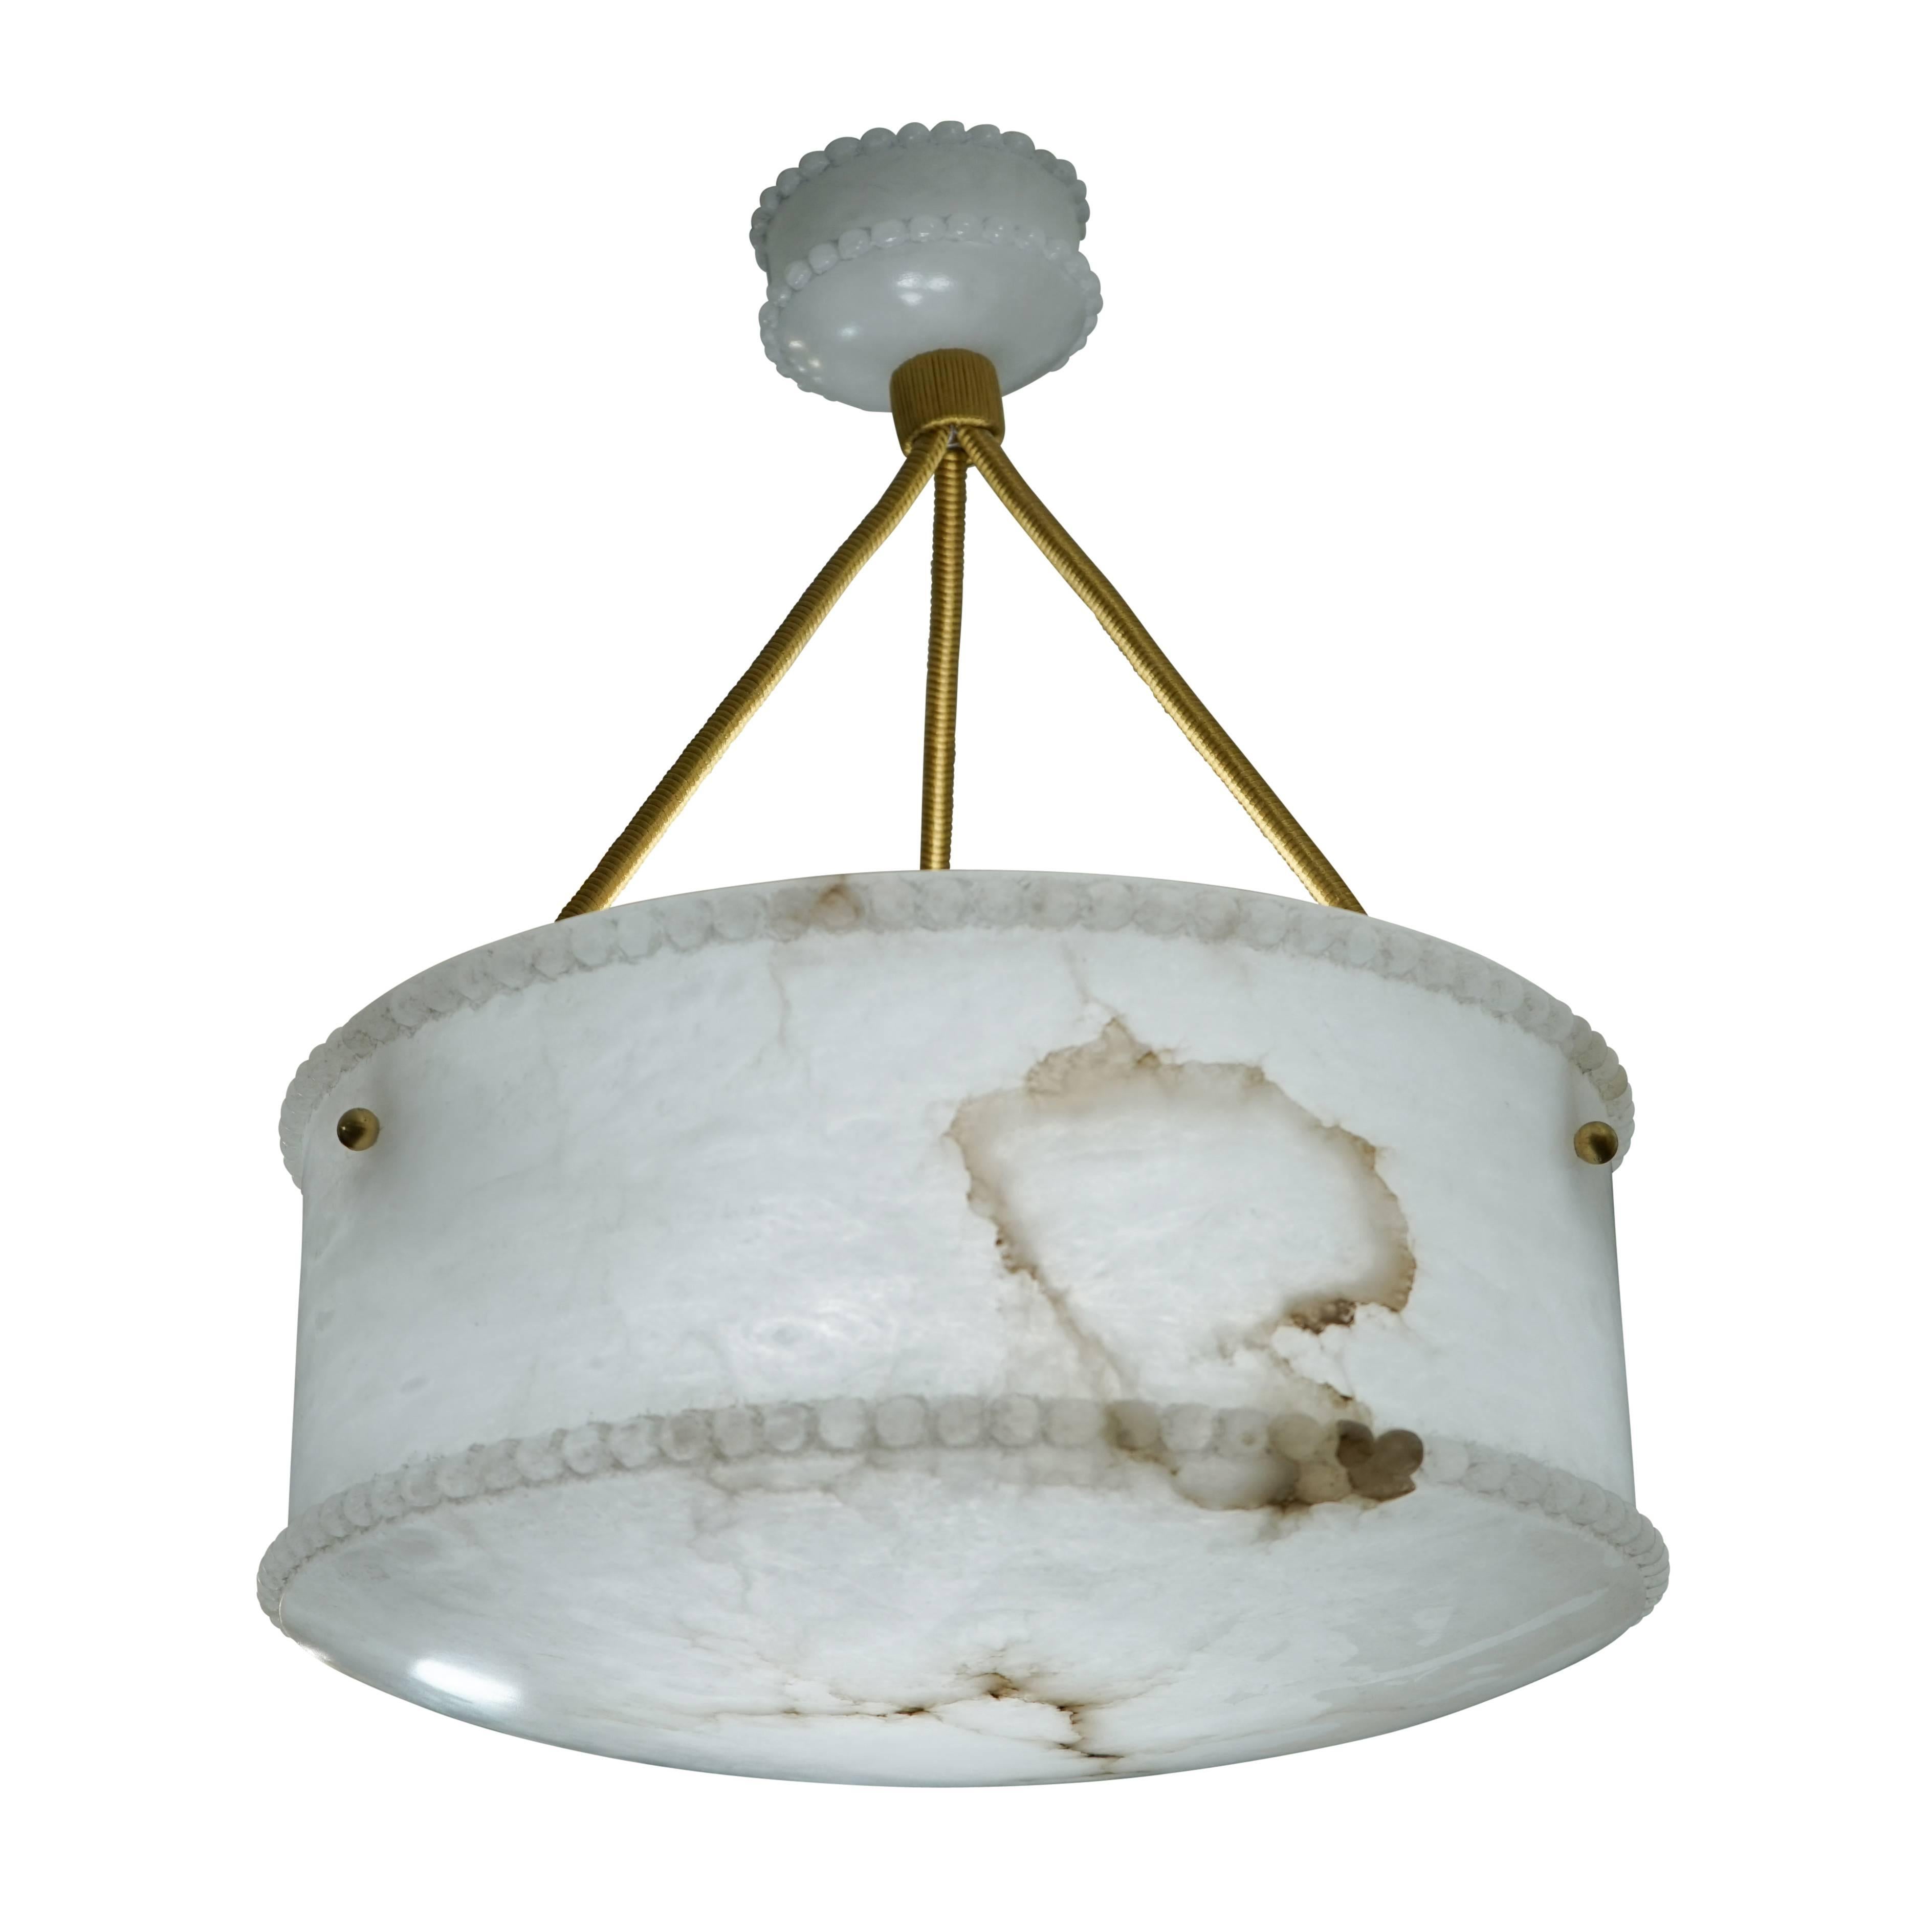 Recently rewired, this deep, lightly veined fixture has upper and lower rims decorated with beading, a matching alabaster canopy and holds three sockets of any wattage LED bulbs. Priced individually, this fixture is also available as part of a set